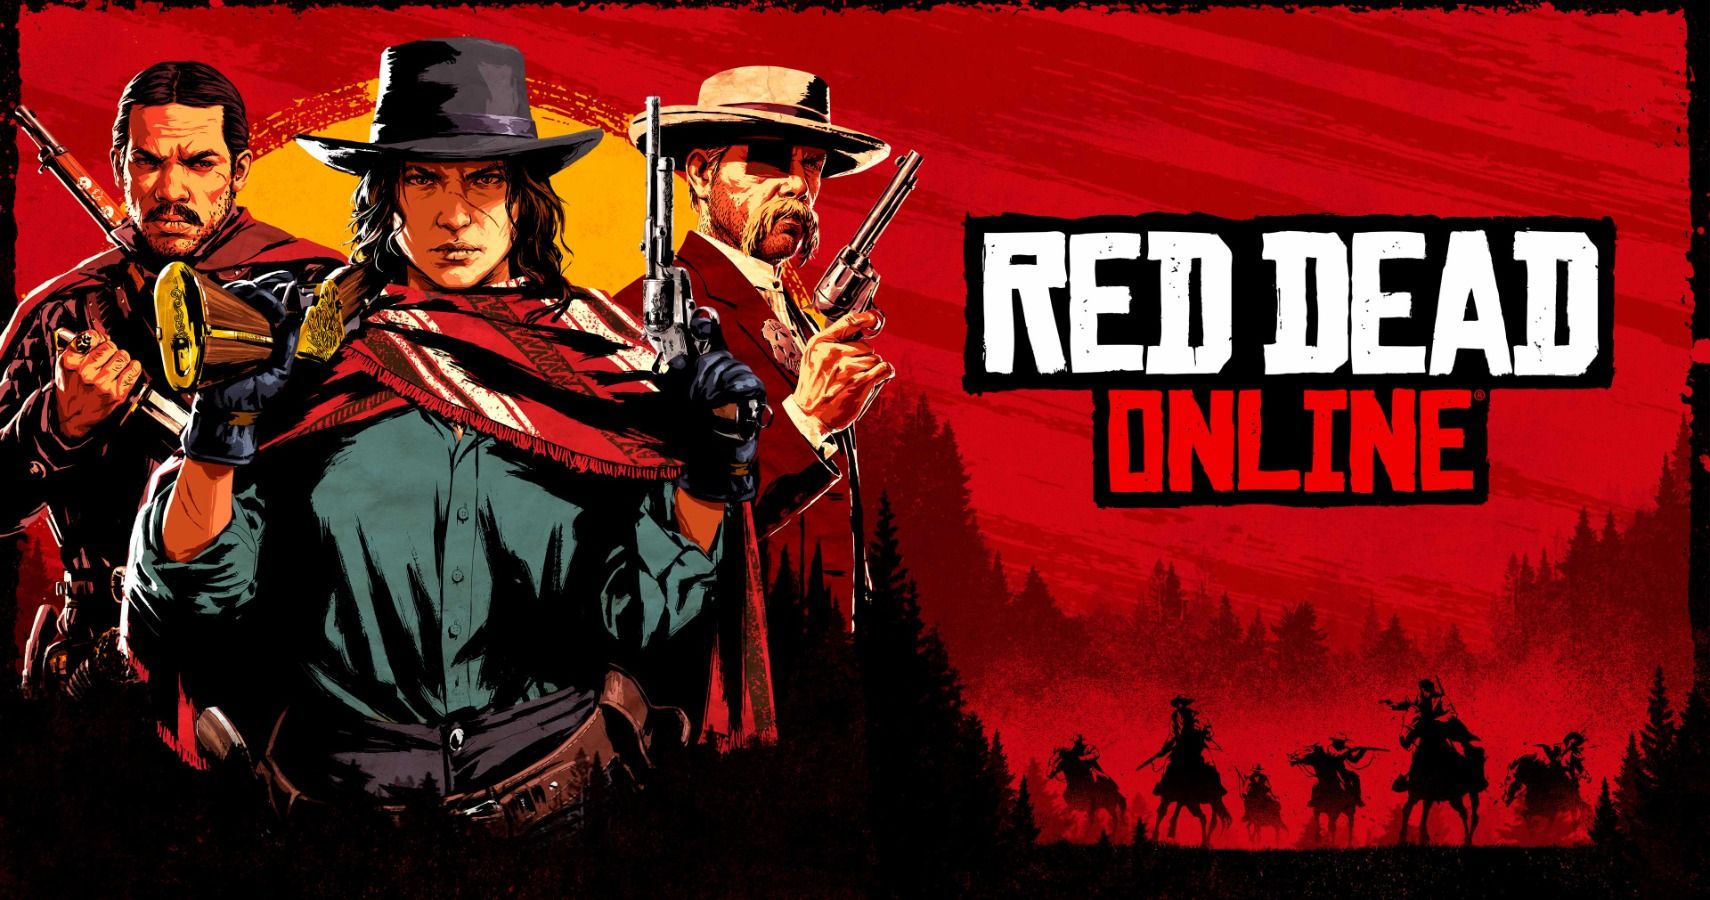 Red Dead Online Is Now Available To Purchase As A Standalone Game For $5